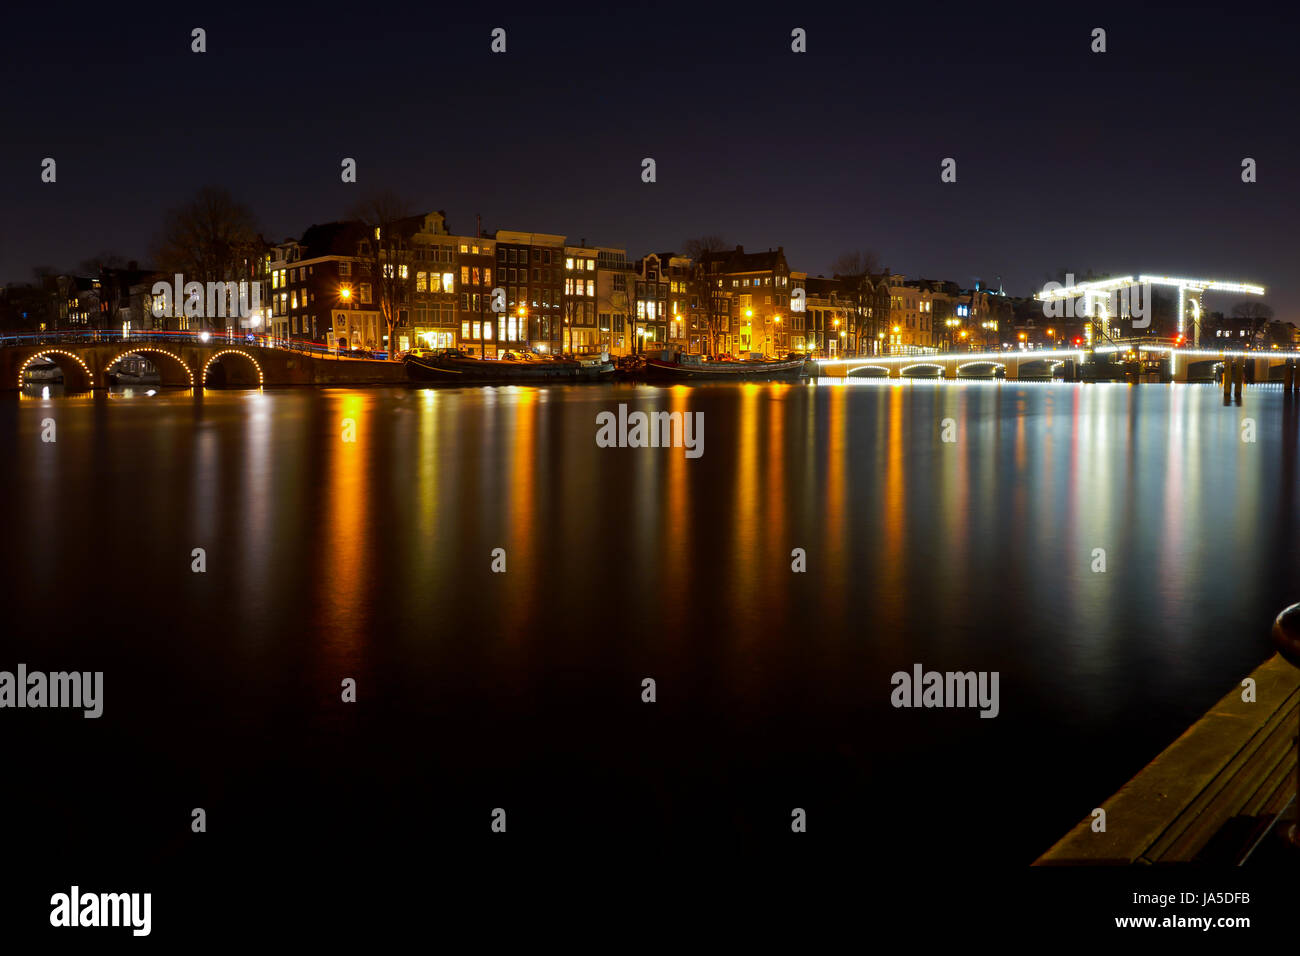 A long exposure of one of the major canals in Amsterdam at night Stock Photo